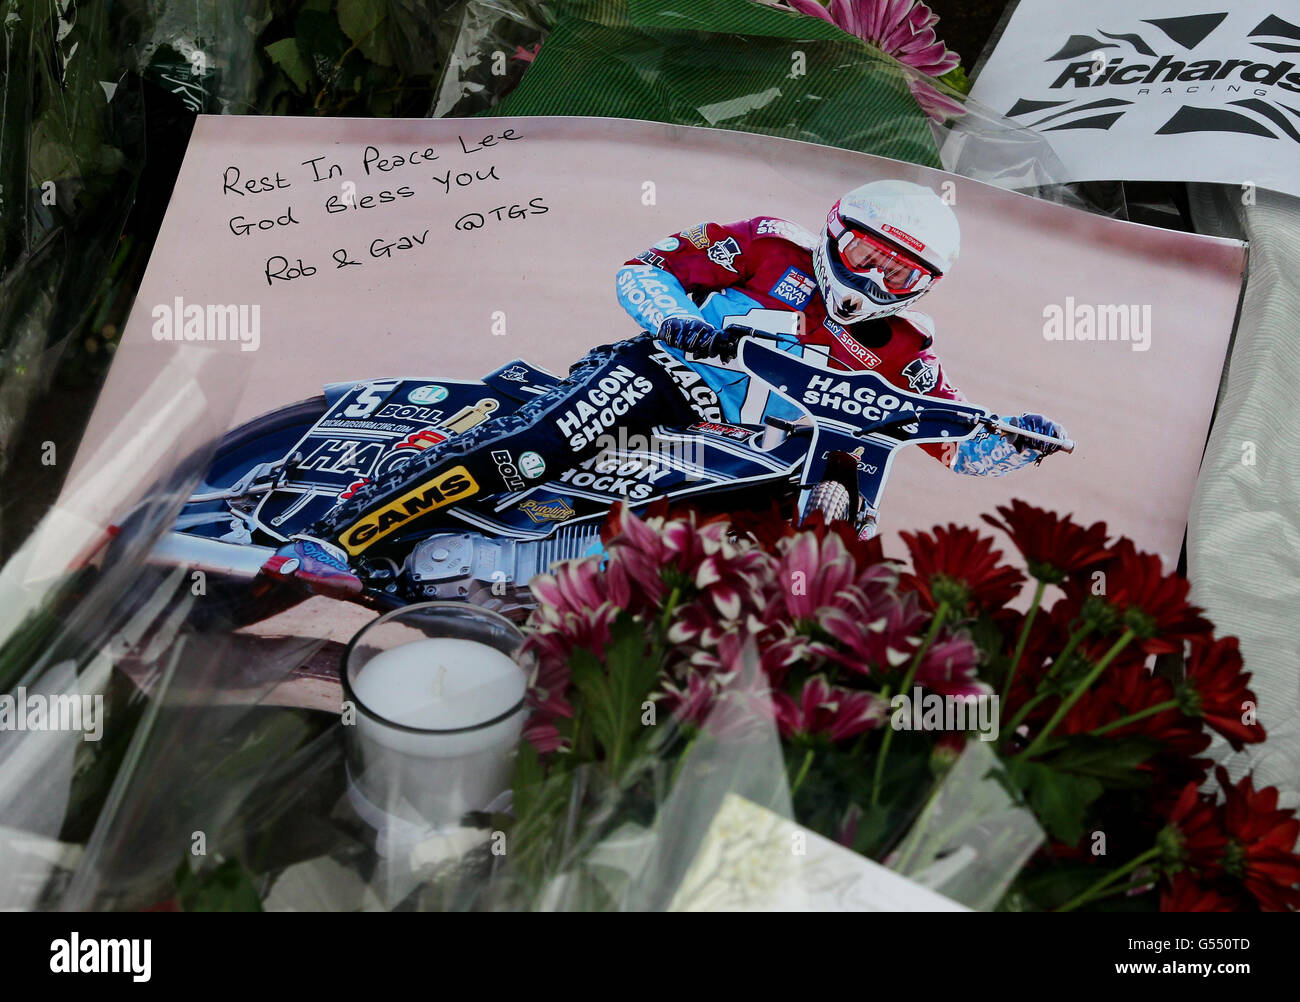 Speedway - Lee Richardson Tribute - Arena Essex Raceway. Floral tributes are laid by fans in a tribute to Lakeside Hammers captain Lee Richardson at the Essex Arena, Thurrock. Stock Photo